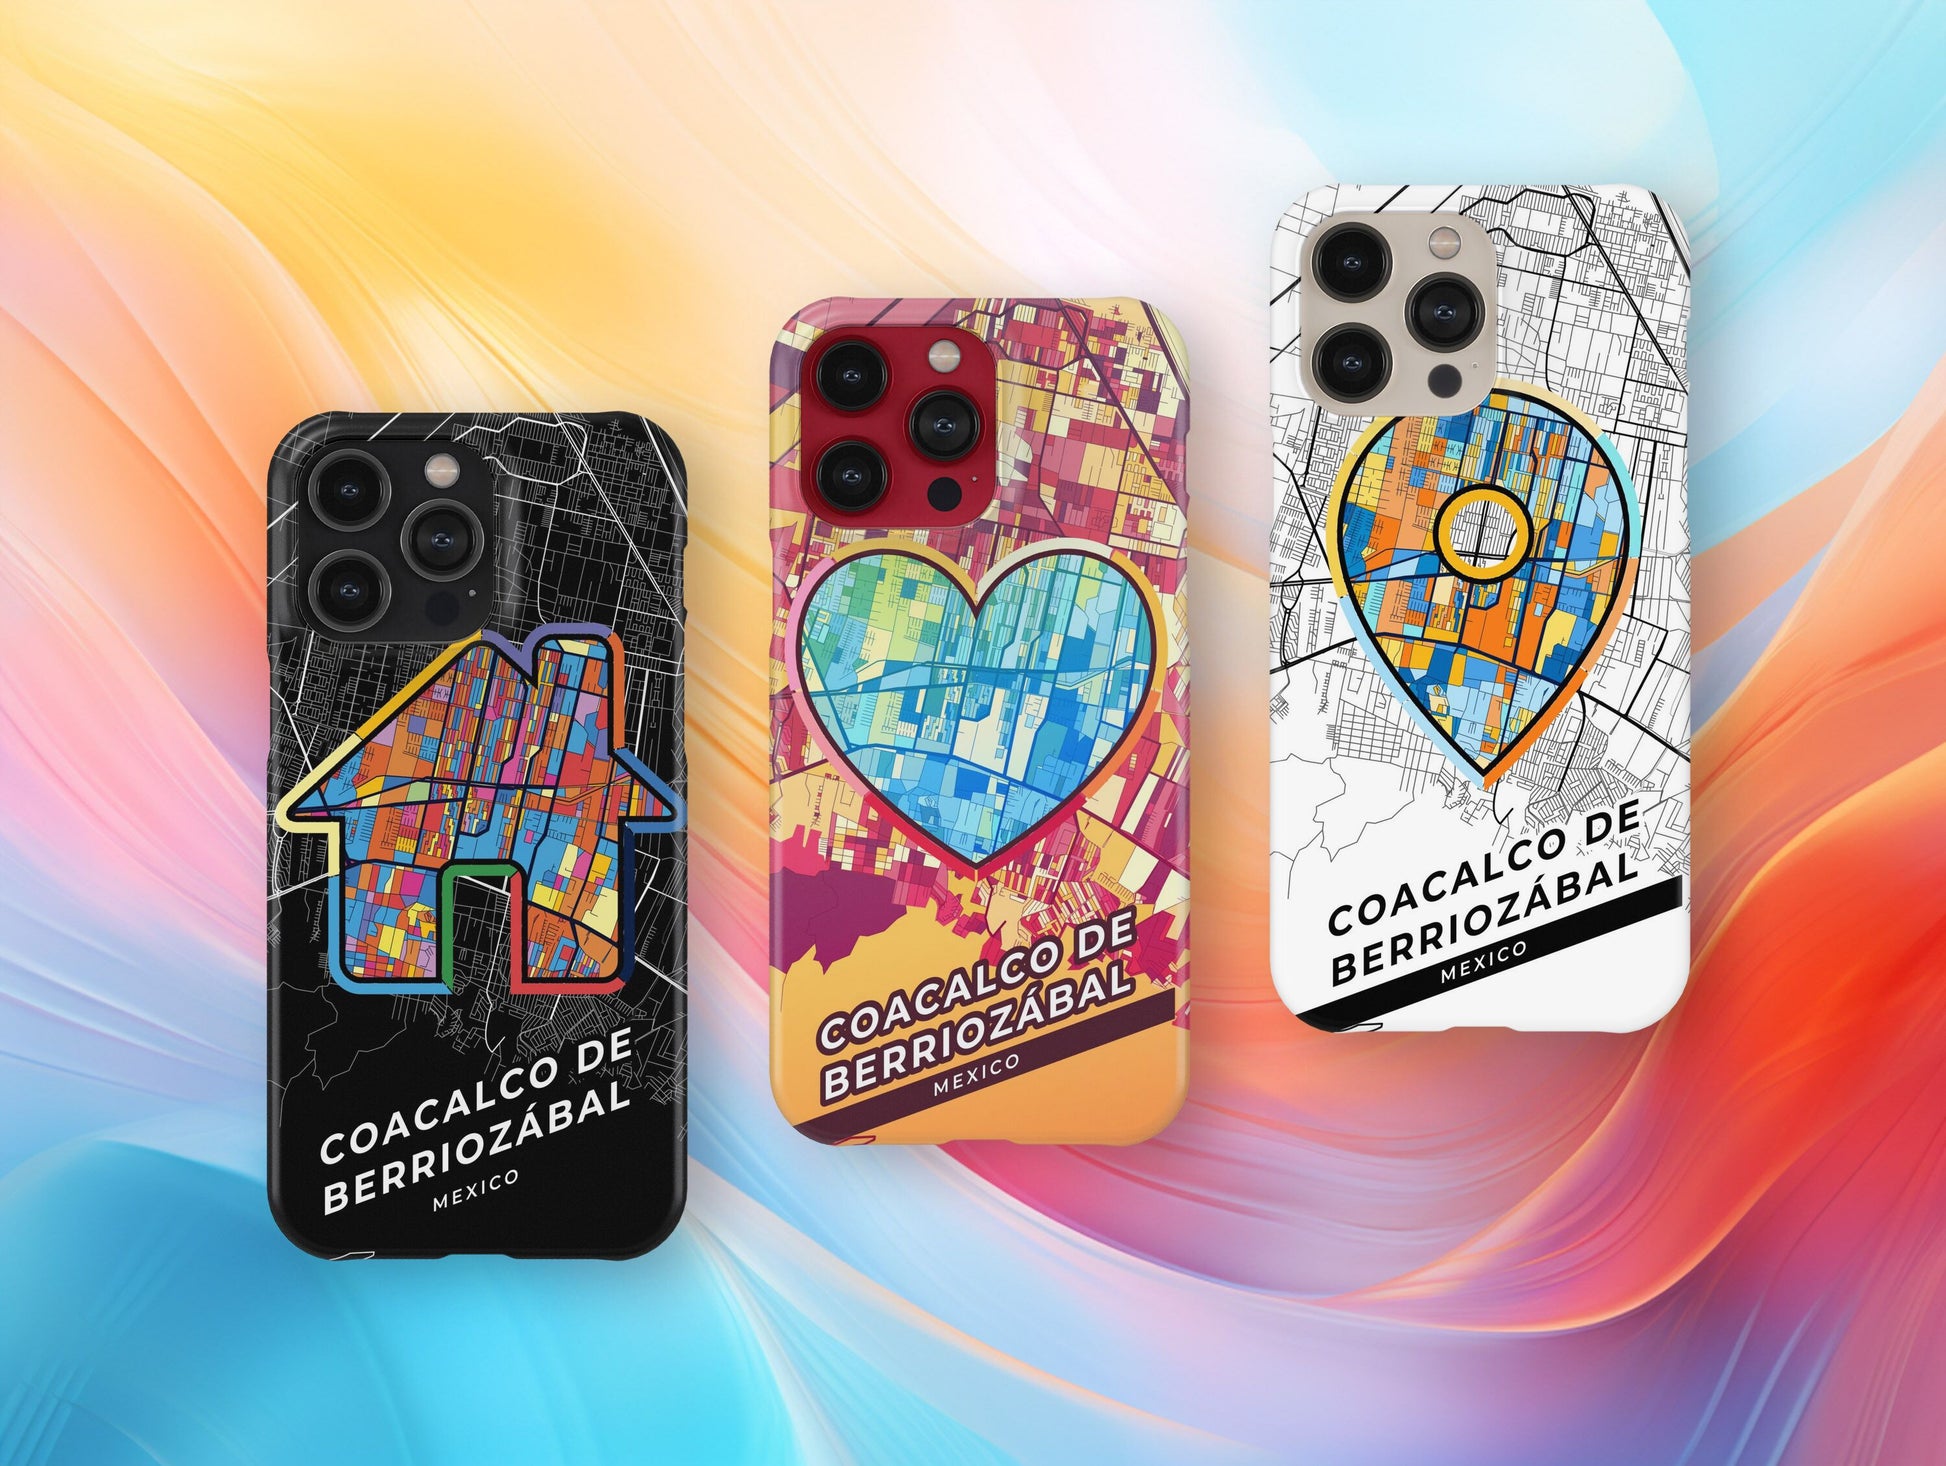 Coacalco De Berriozábal Mexico slim phone case with colorful icon. Birthday, wedding or housewarming gift. Couple match cases.